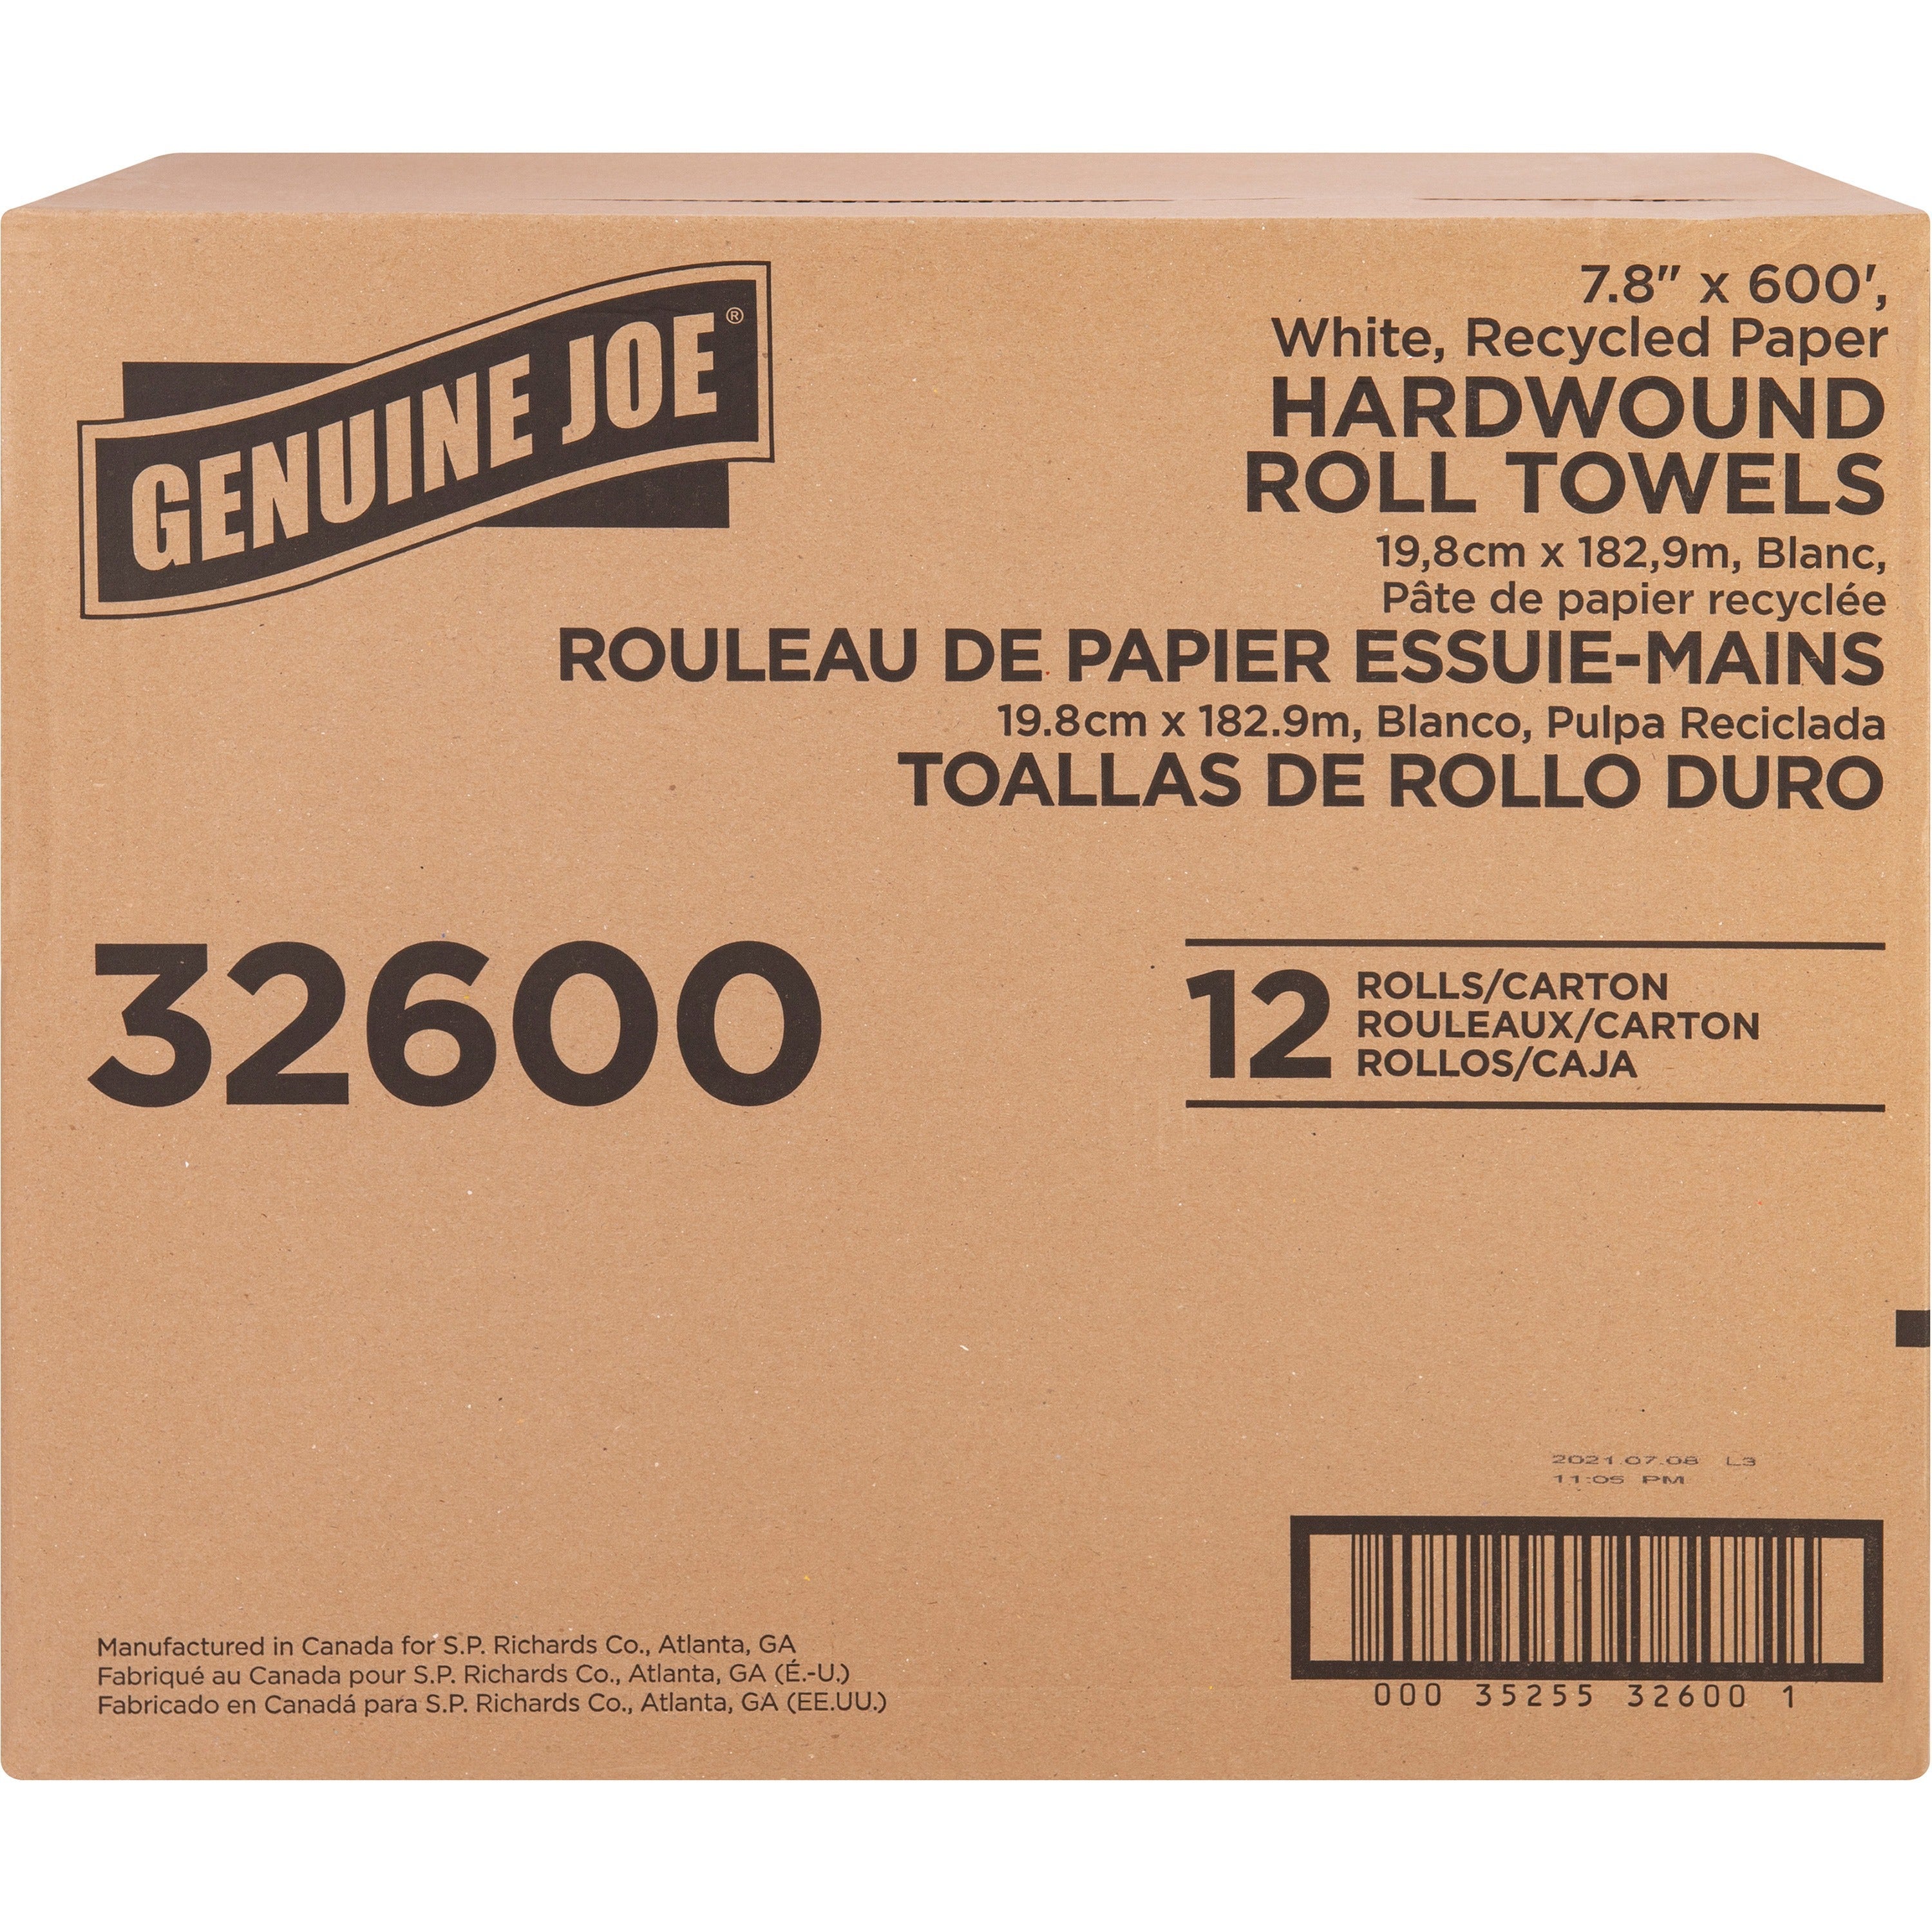 genuine-joe-hardwound-roll-paper-towels-780-x-600-ft-2-core-white-paper-absorbent-for-restroom-12-carton_gjo32600 - 2